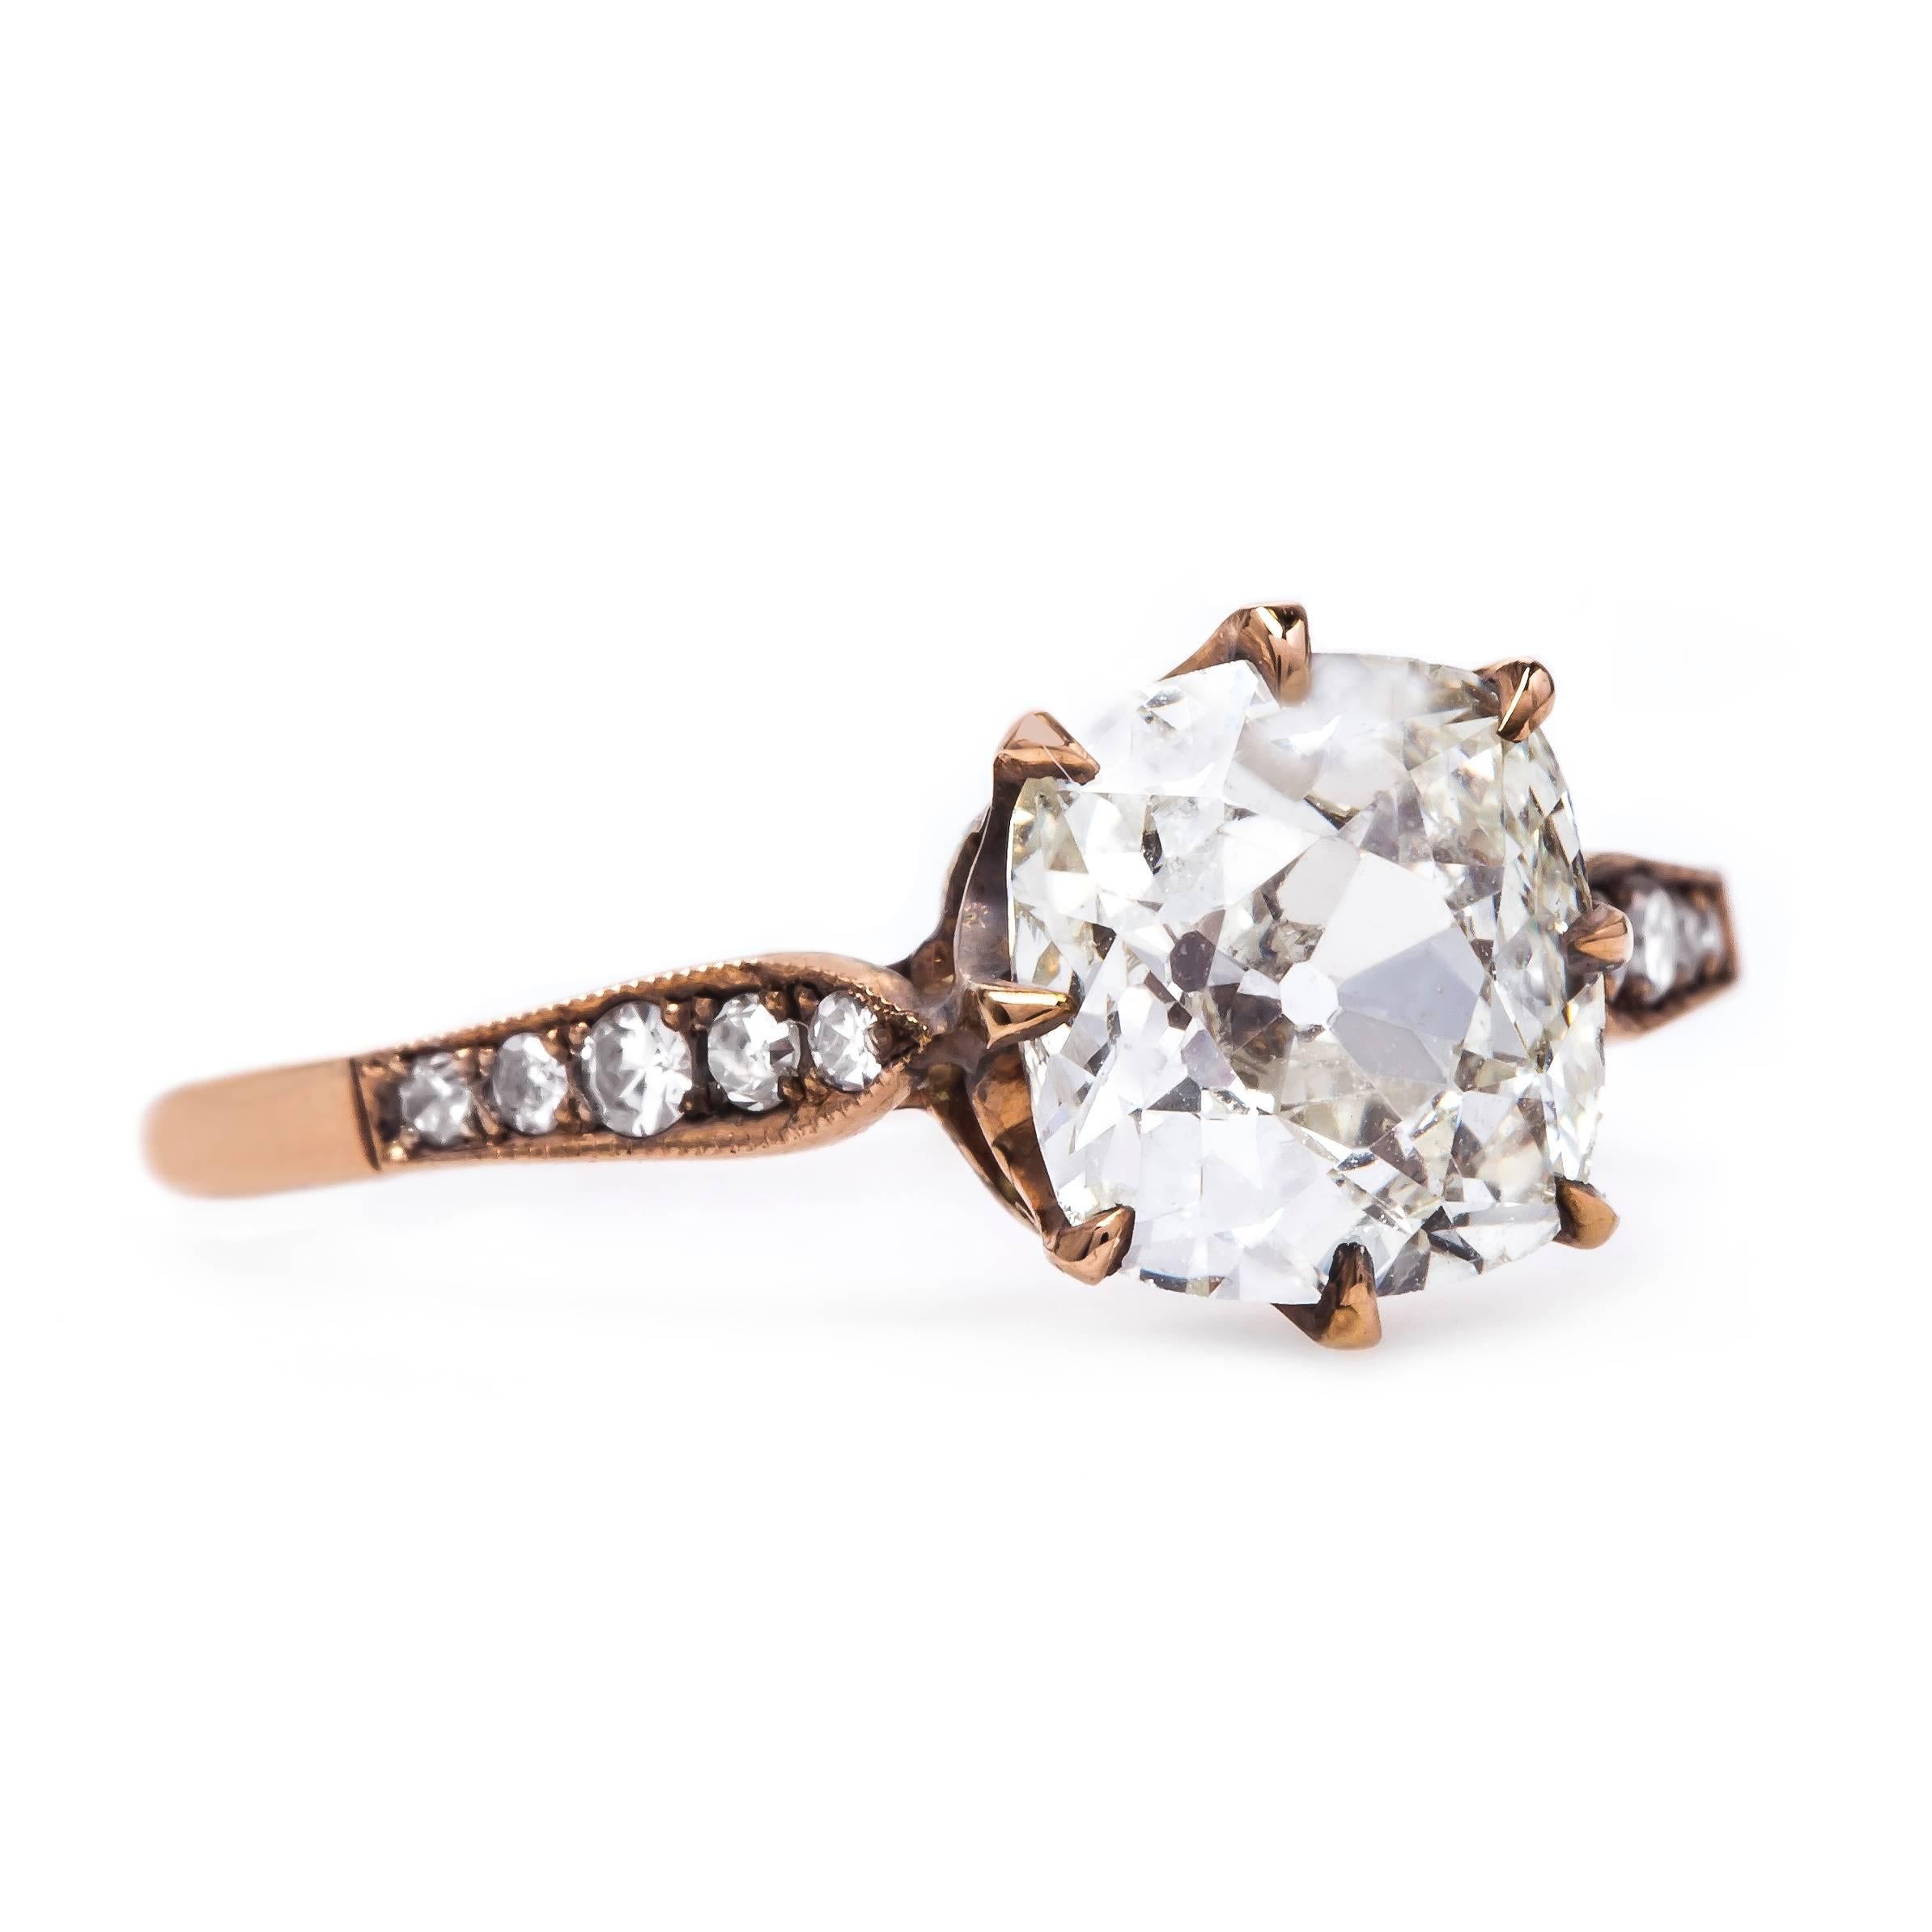 Meridian is a remarkable Trumpet & Horn exclusive handmade vintage-inspired engagement ring set in 18k rose gold. The ring centers a 1.59ct EGL Certified Old Mine Cut diamond graded K color VS2 clarity. This simple engagement ring setting showcases